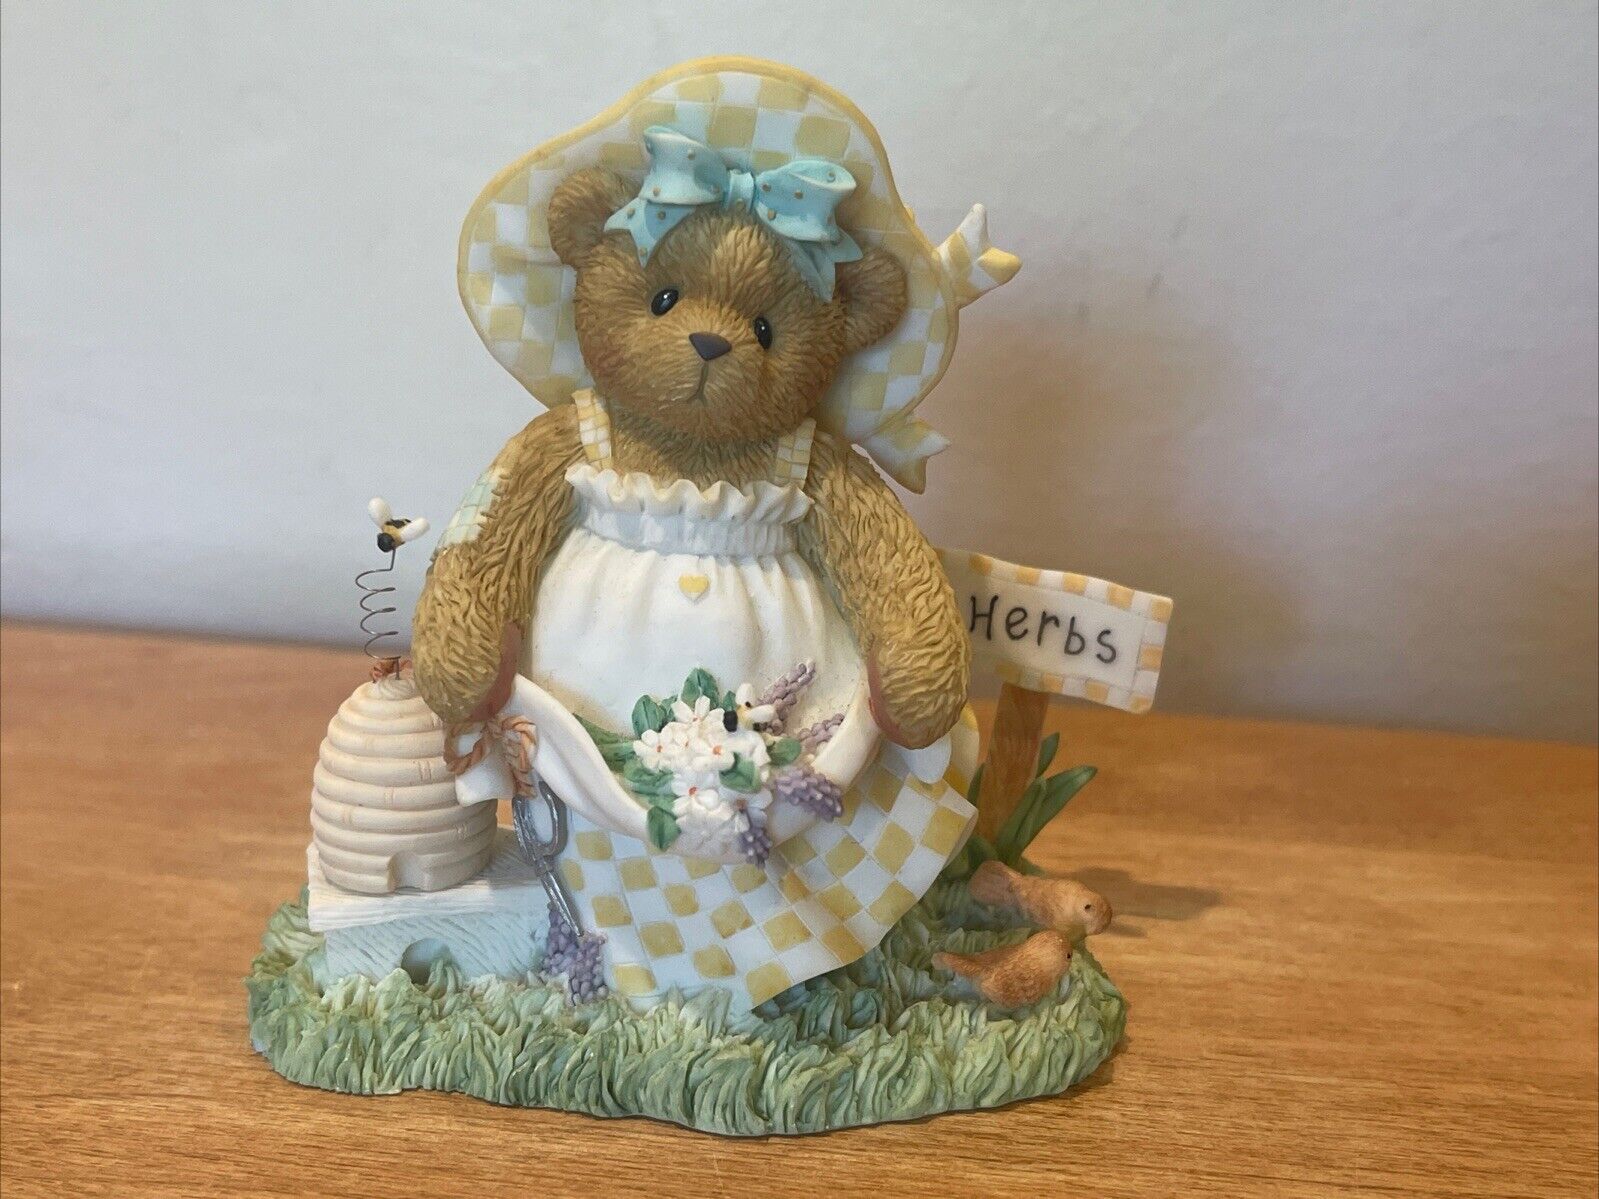 Cherished Teddies Flo Gather Friendships Like Blossoms 107063, Herbs & Bee Hive